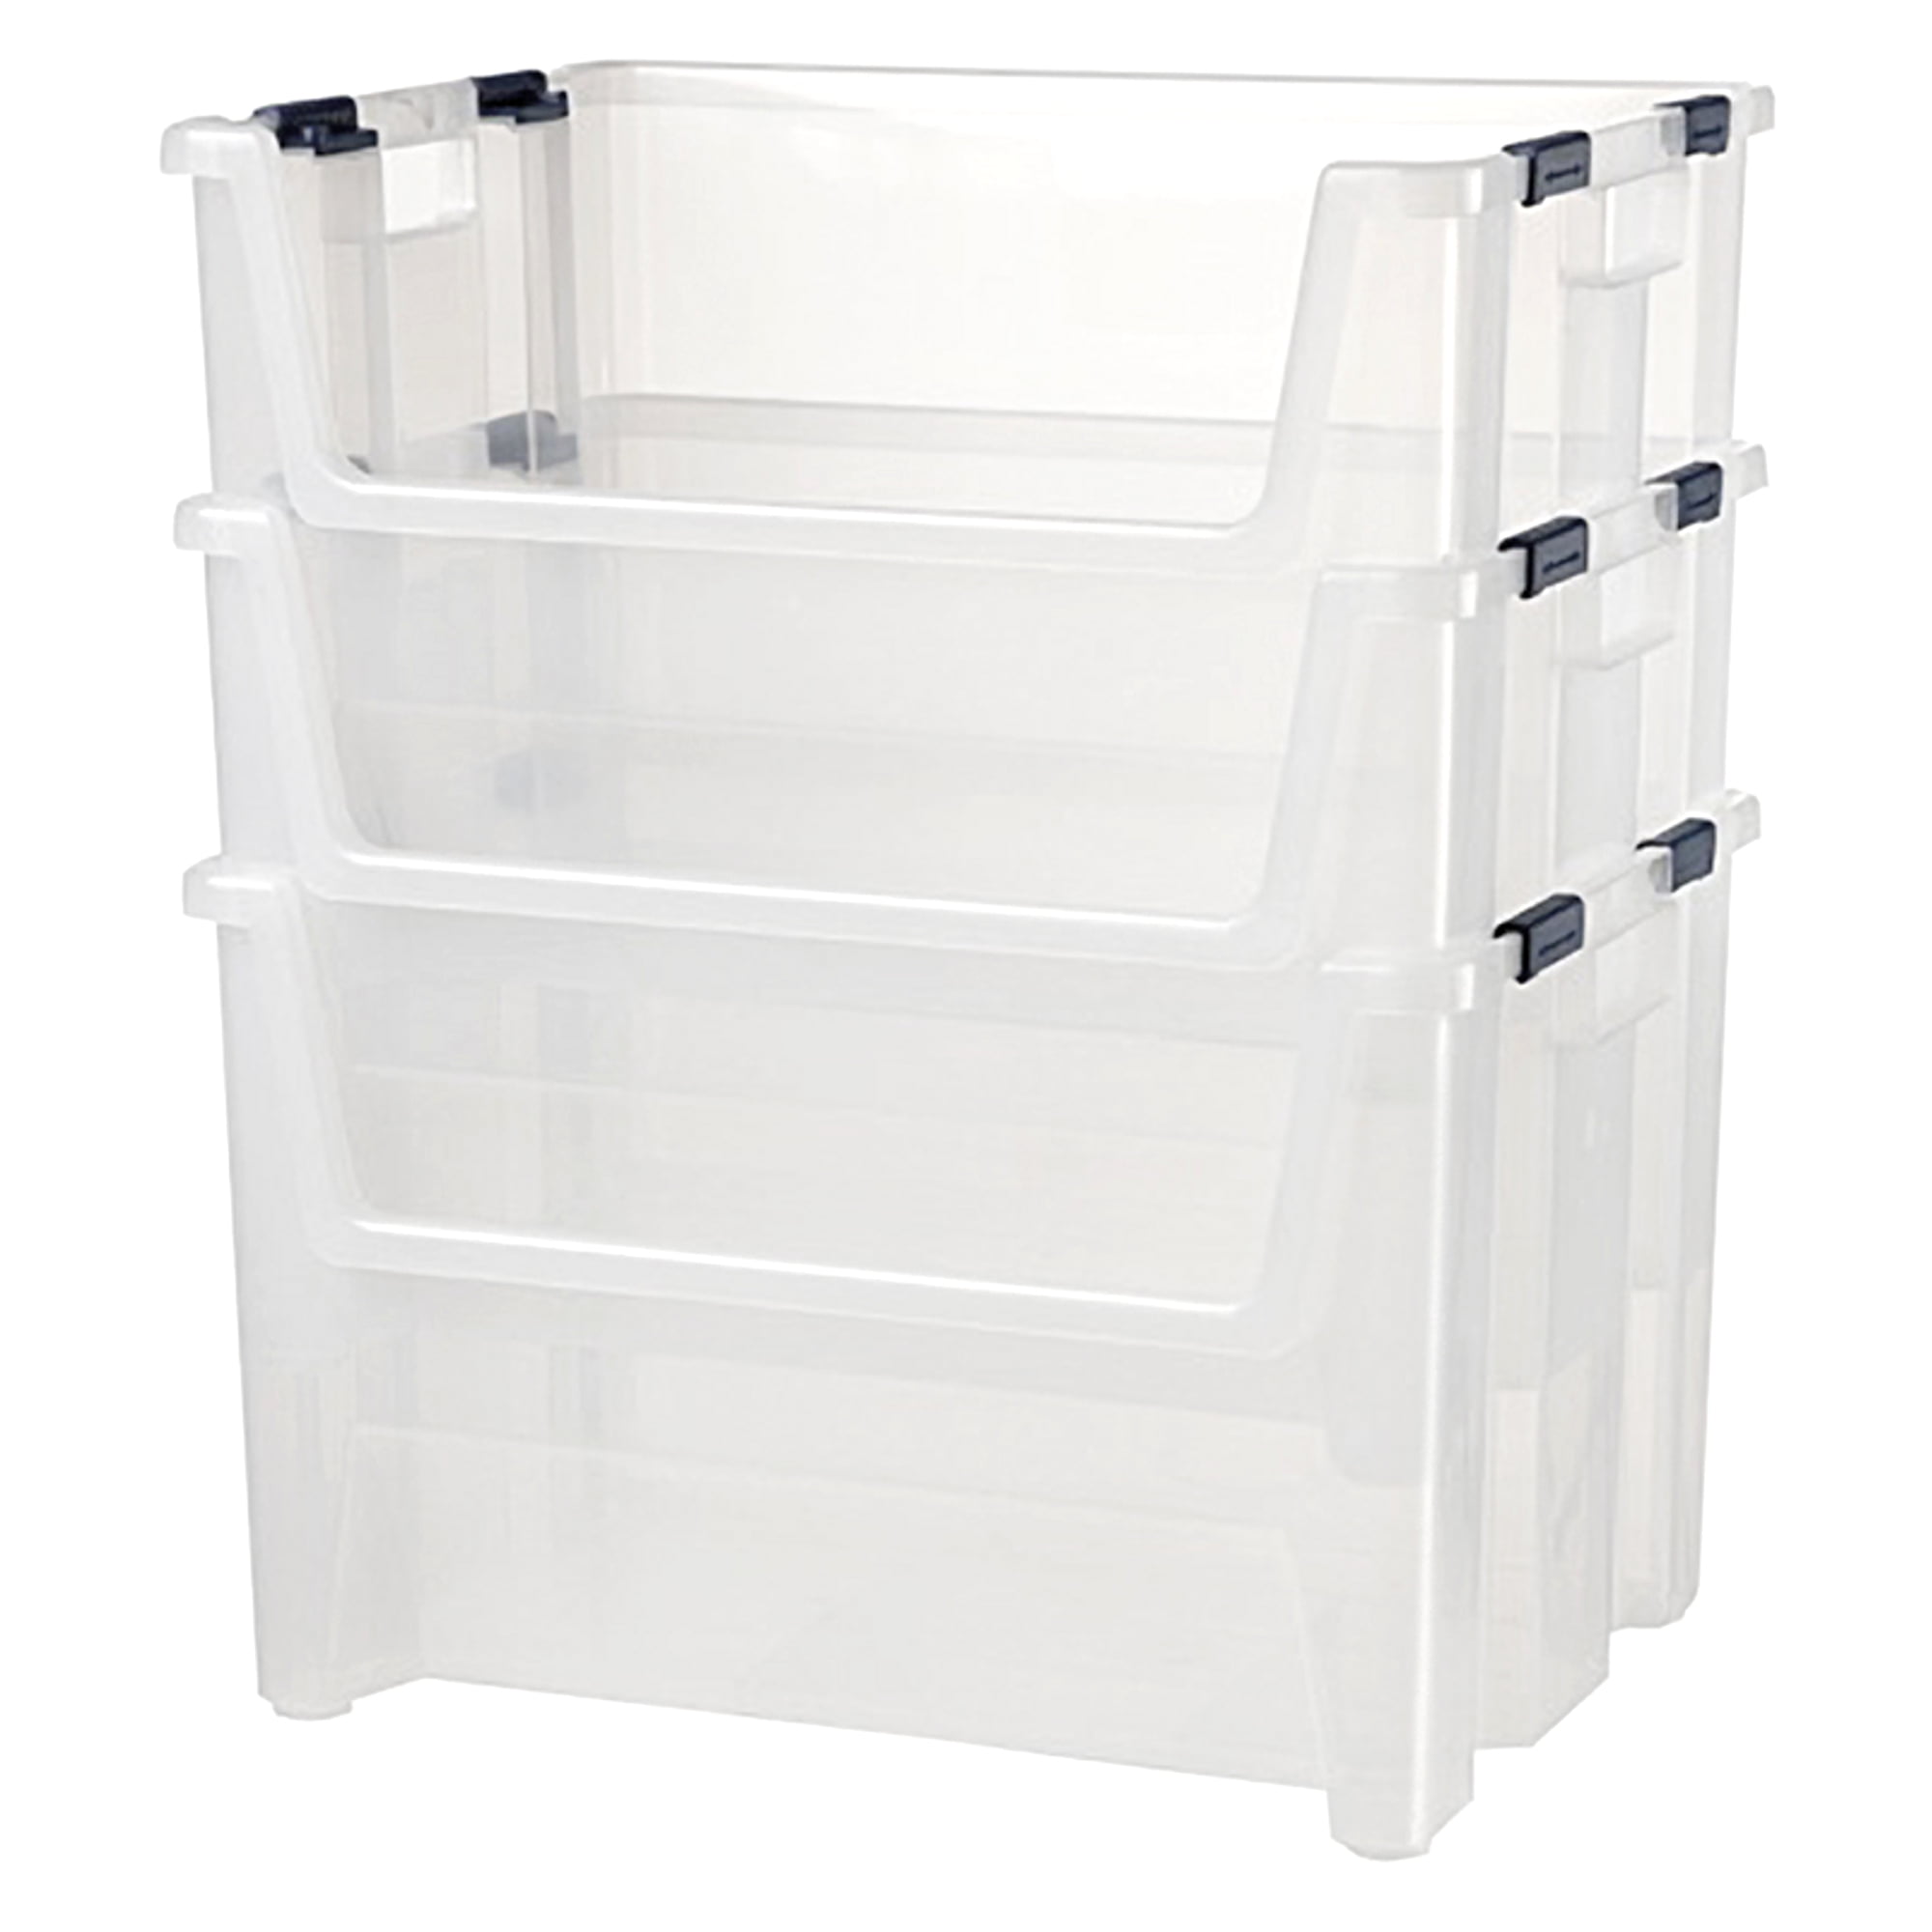 Extra Large Stackable Storage Container – Bins & Things